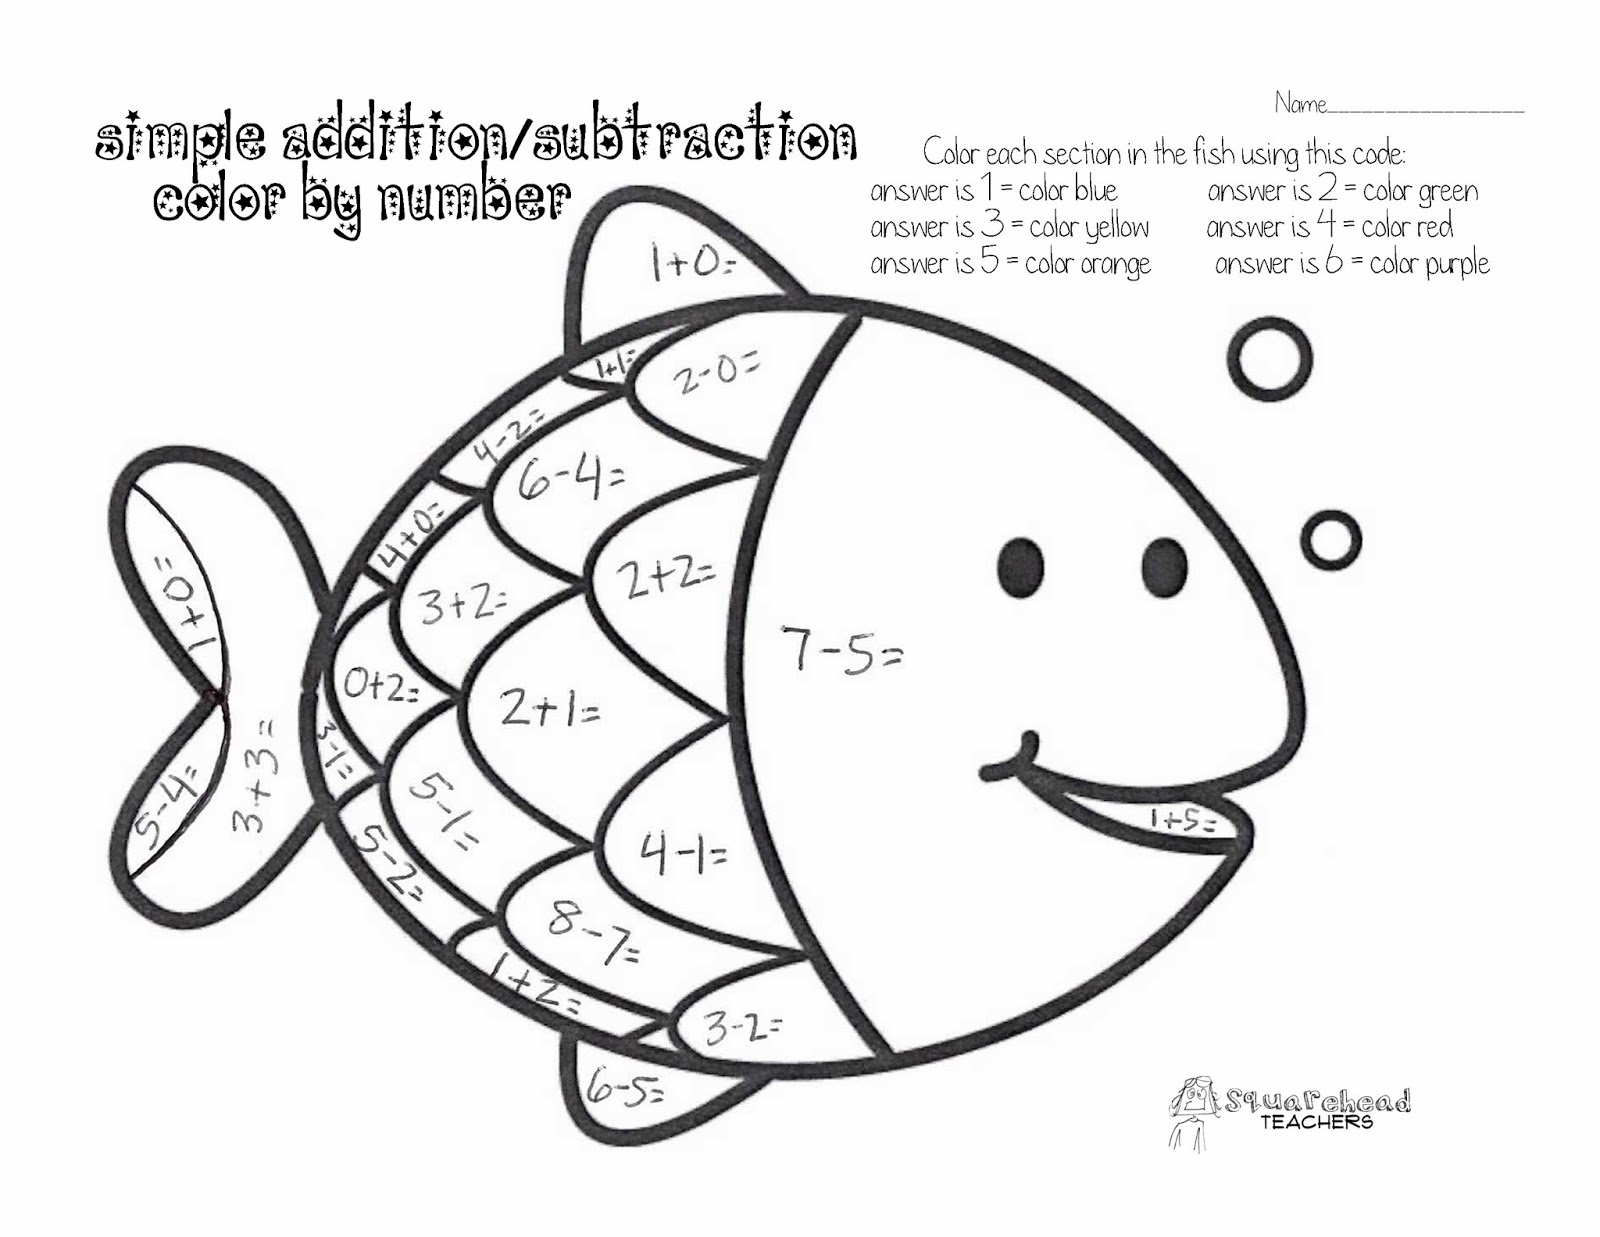 Coloring page: Magic coloring (Educational) #126229 - Printable coloring pages